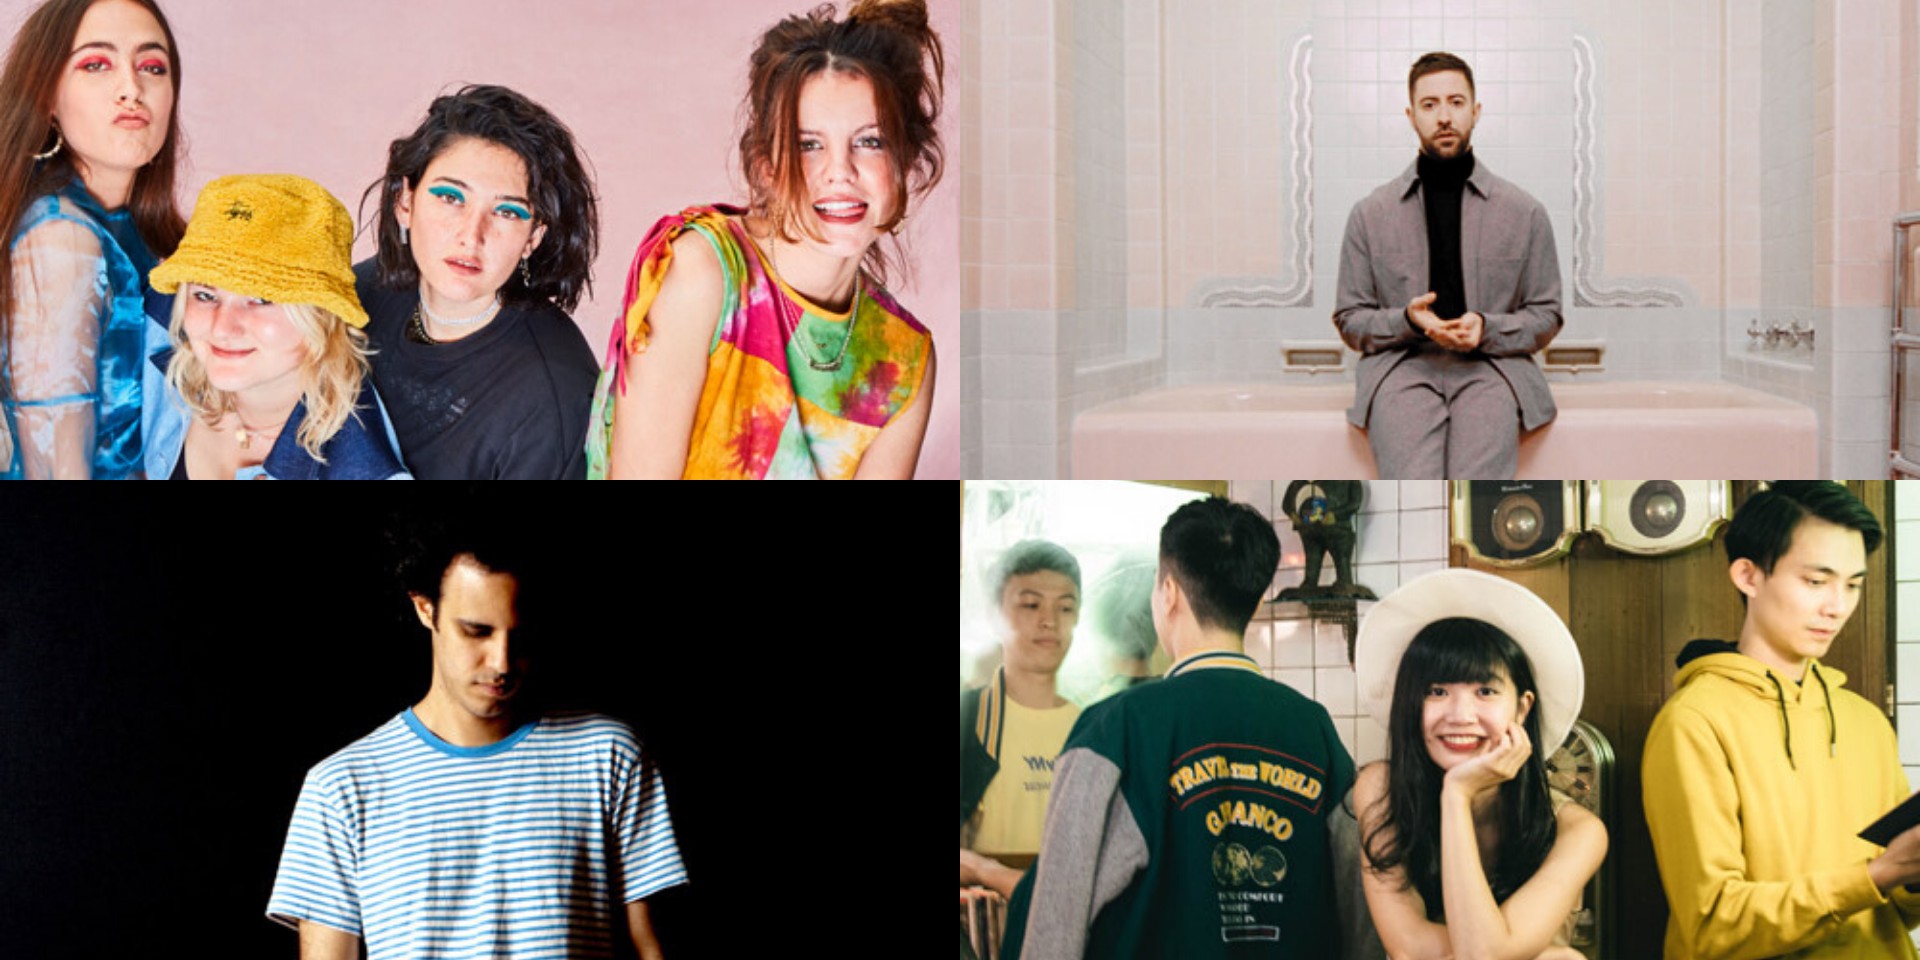 Fuji Rock Festival adds Bruno Major, Four Tet, Hinds, Elephant Gym, and more to 2020 lineup